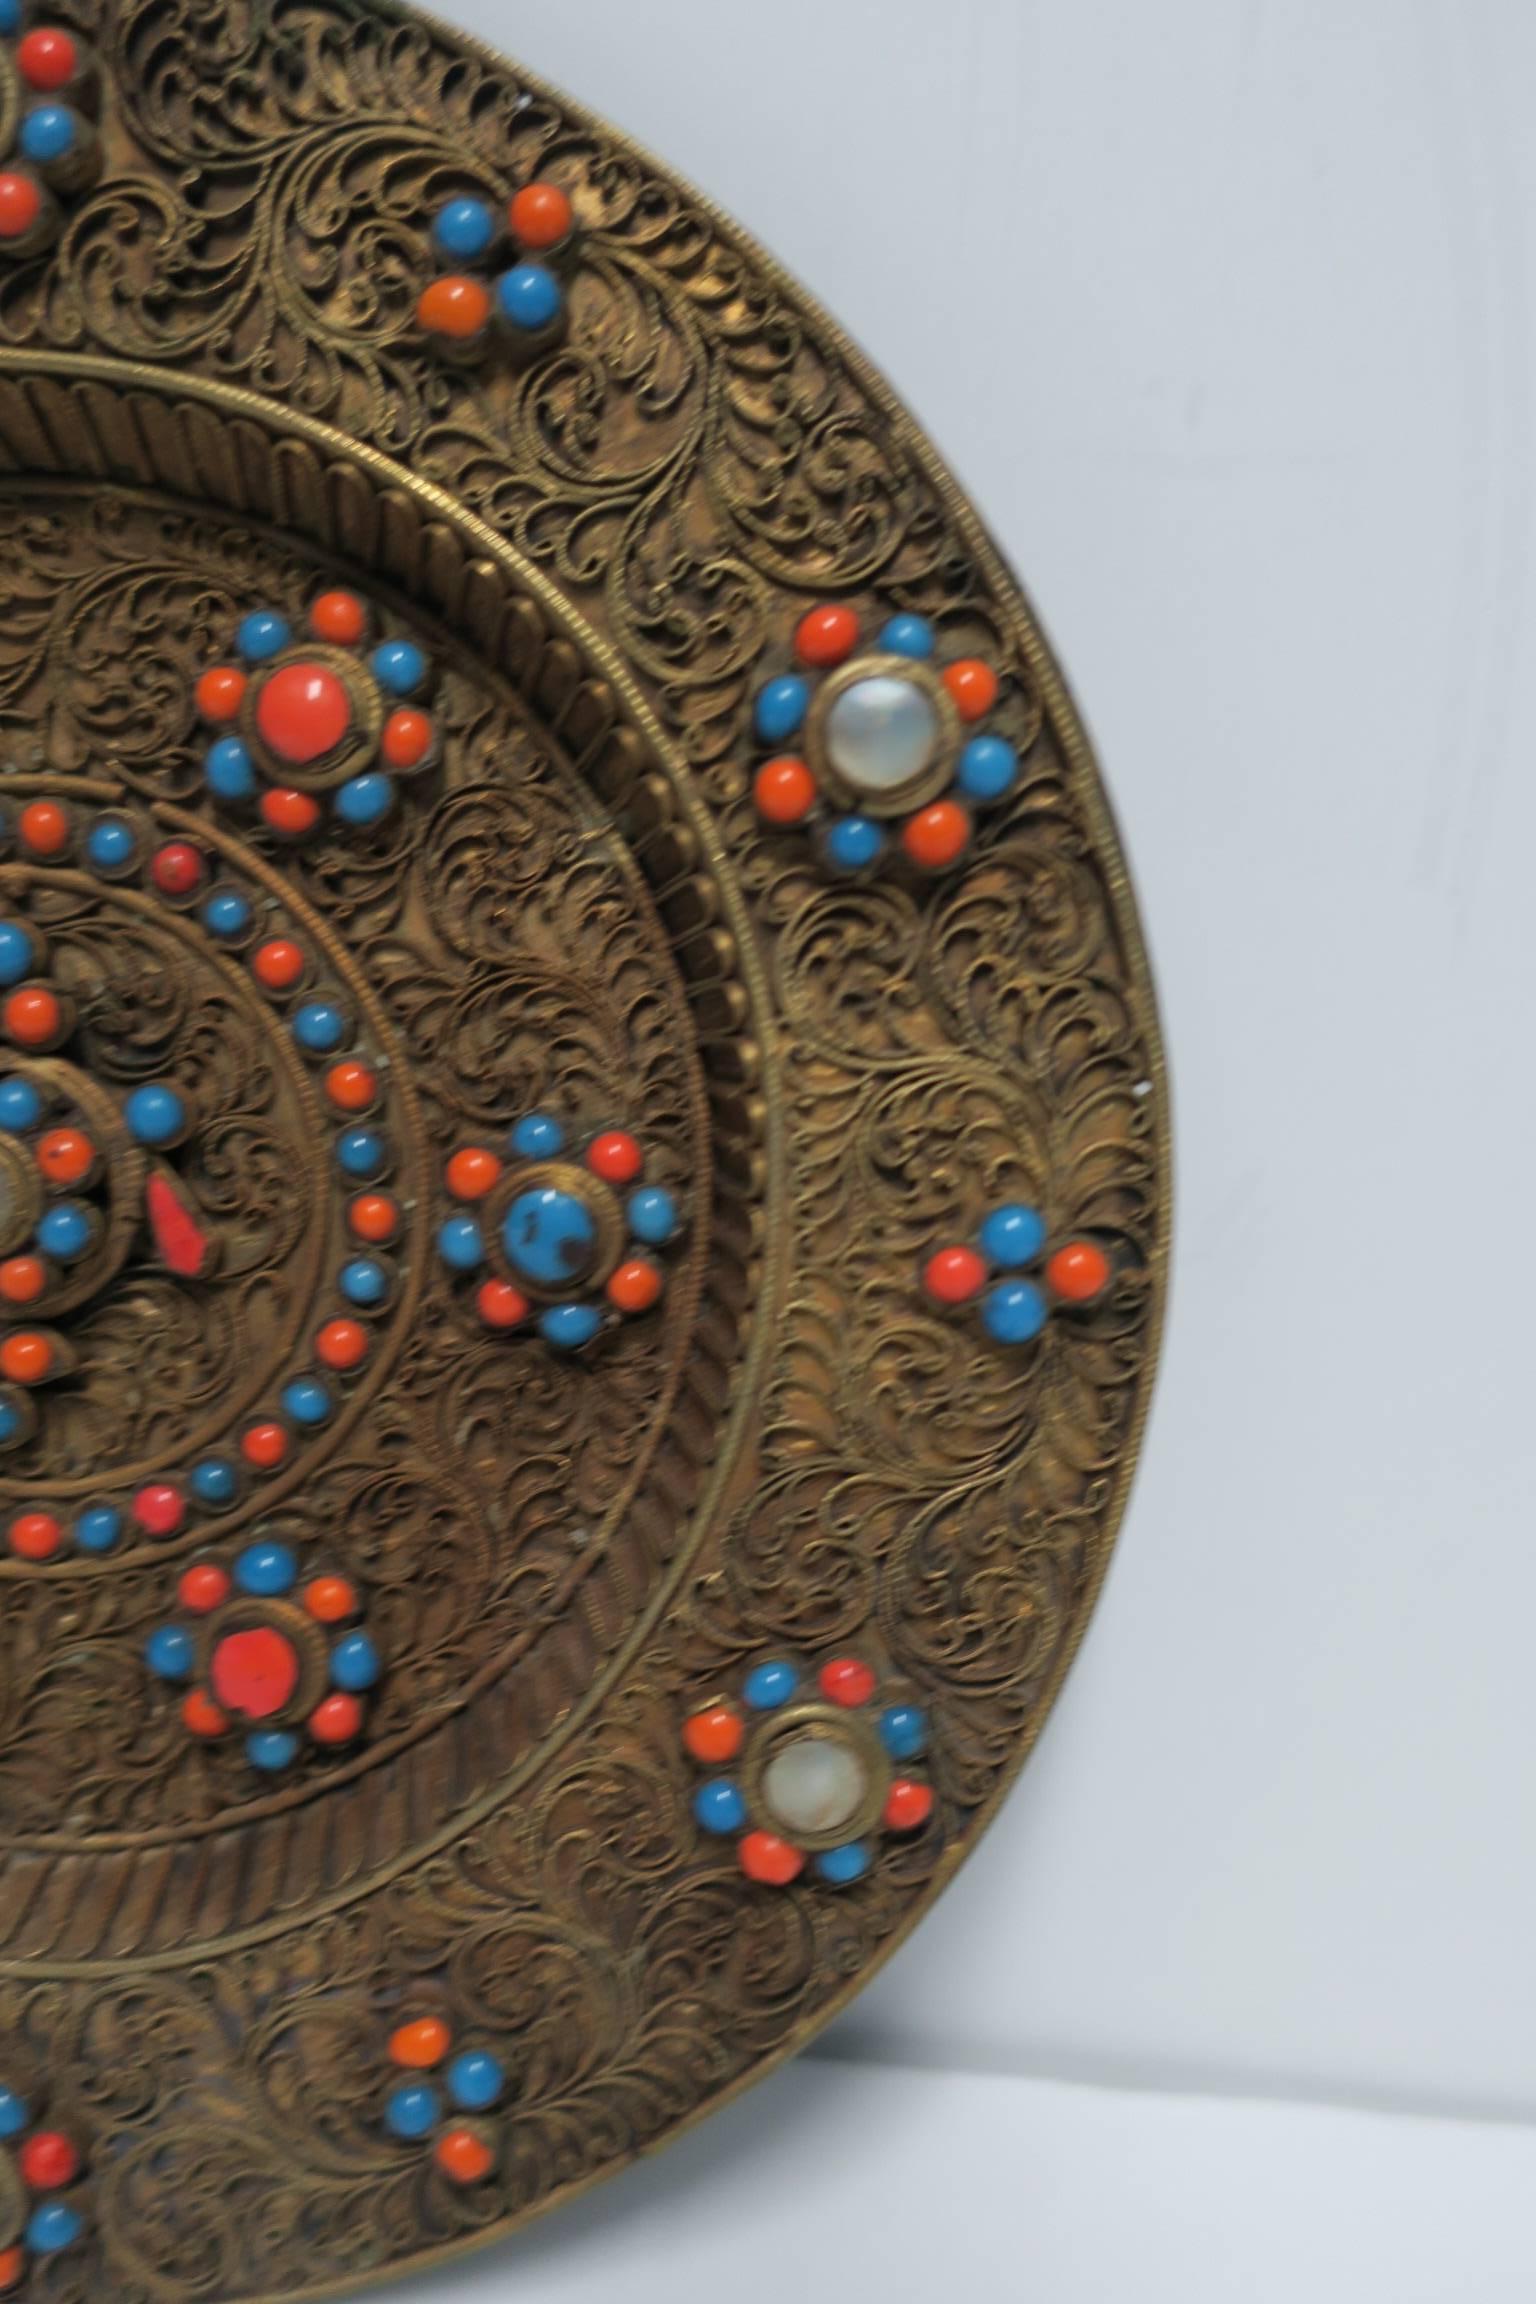 Brass and Mother of Pearl Decorative Wall Plate, Nepalese In Good Condition For Sale In New York, NY